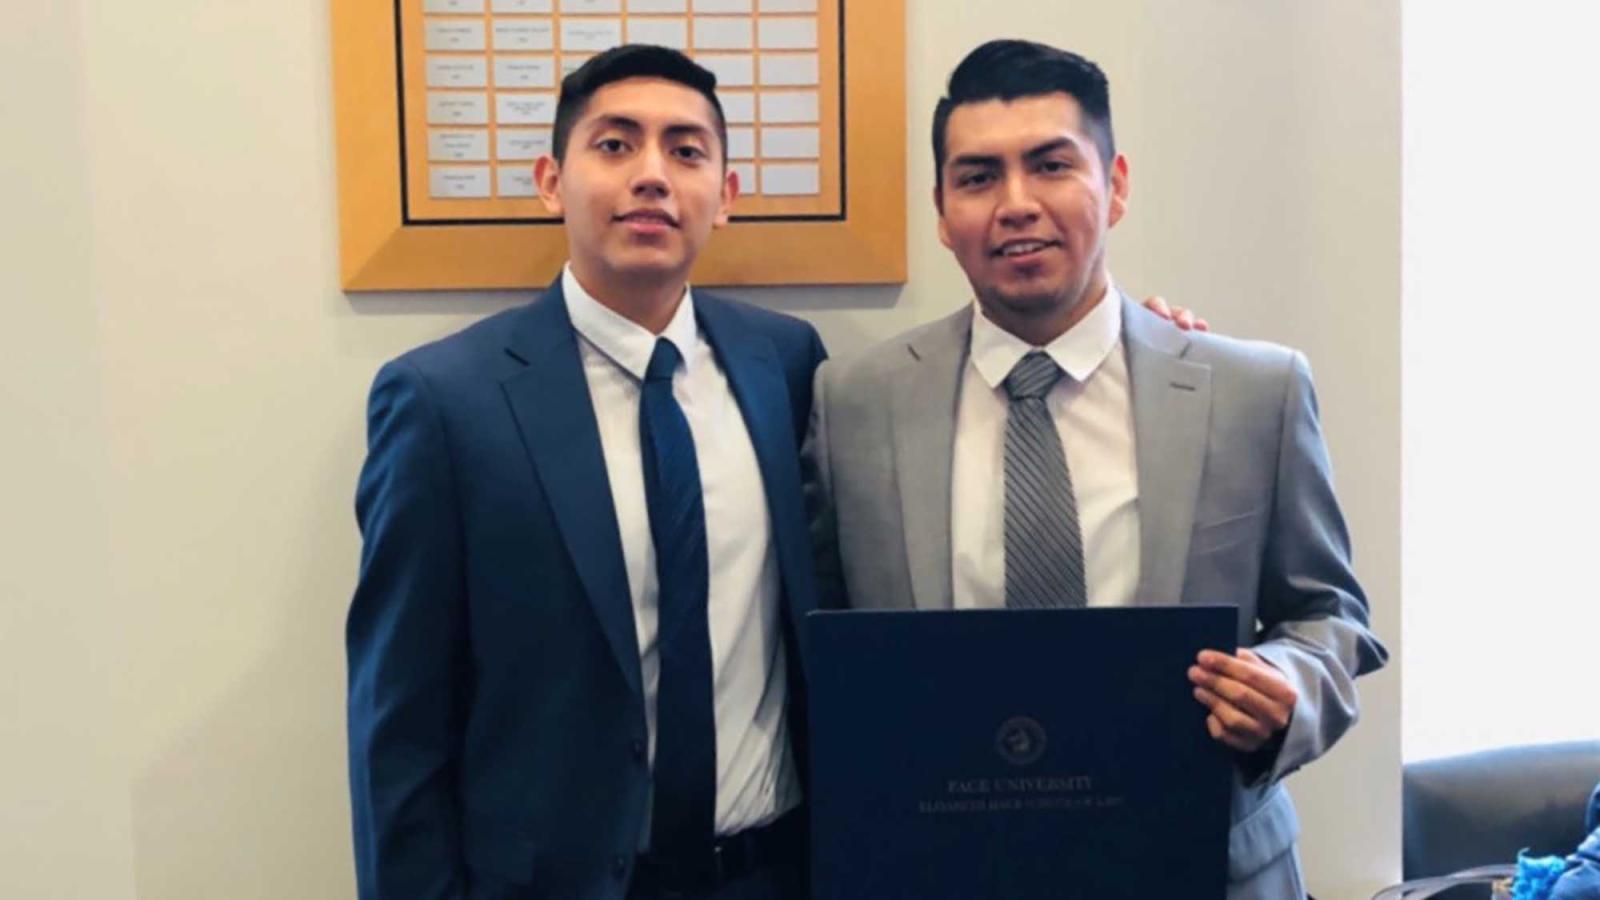 Photo of the Campeche brothers-Law school student and alumnus